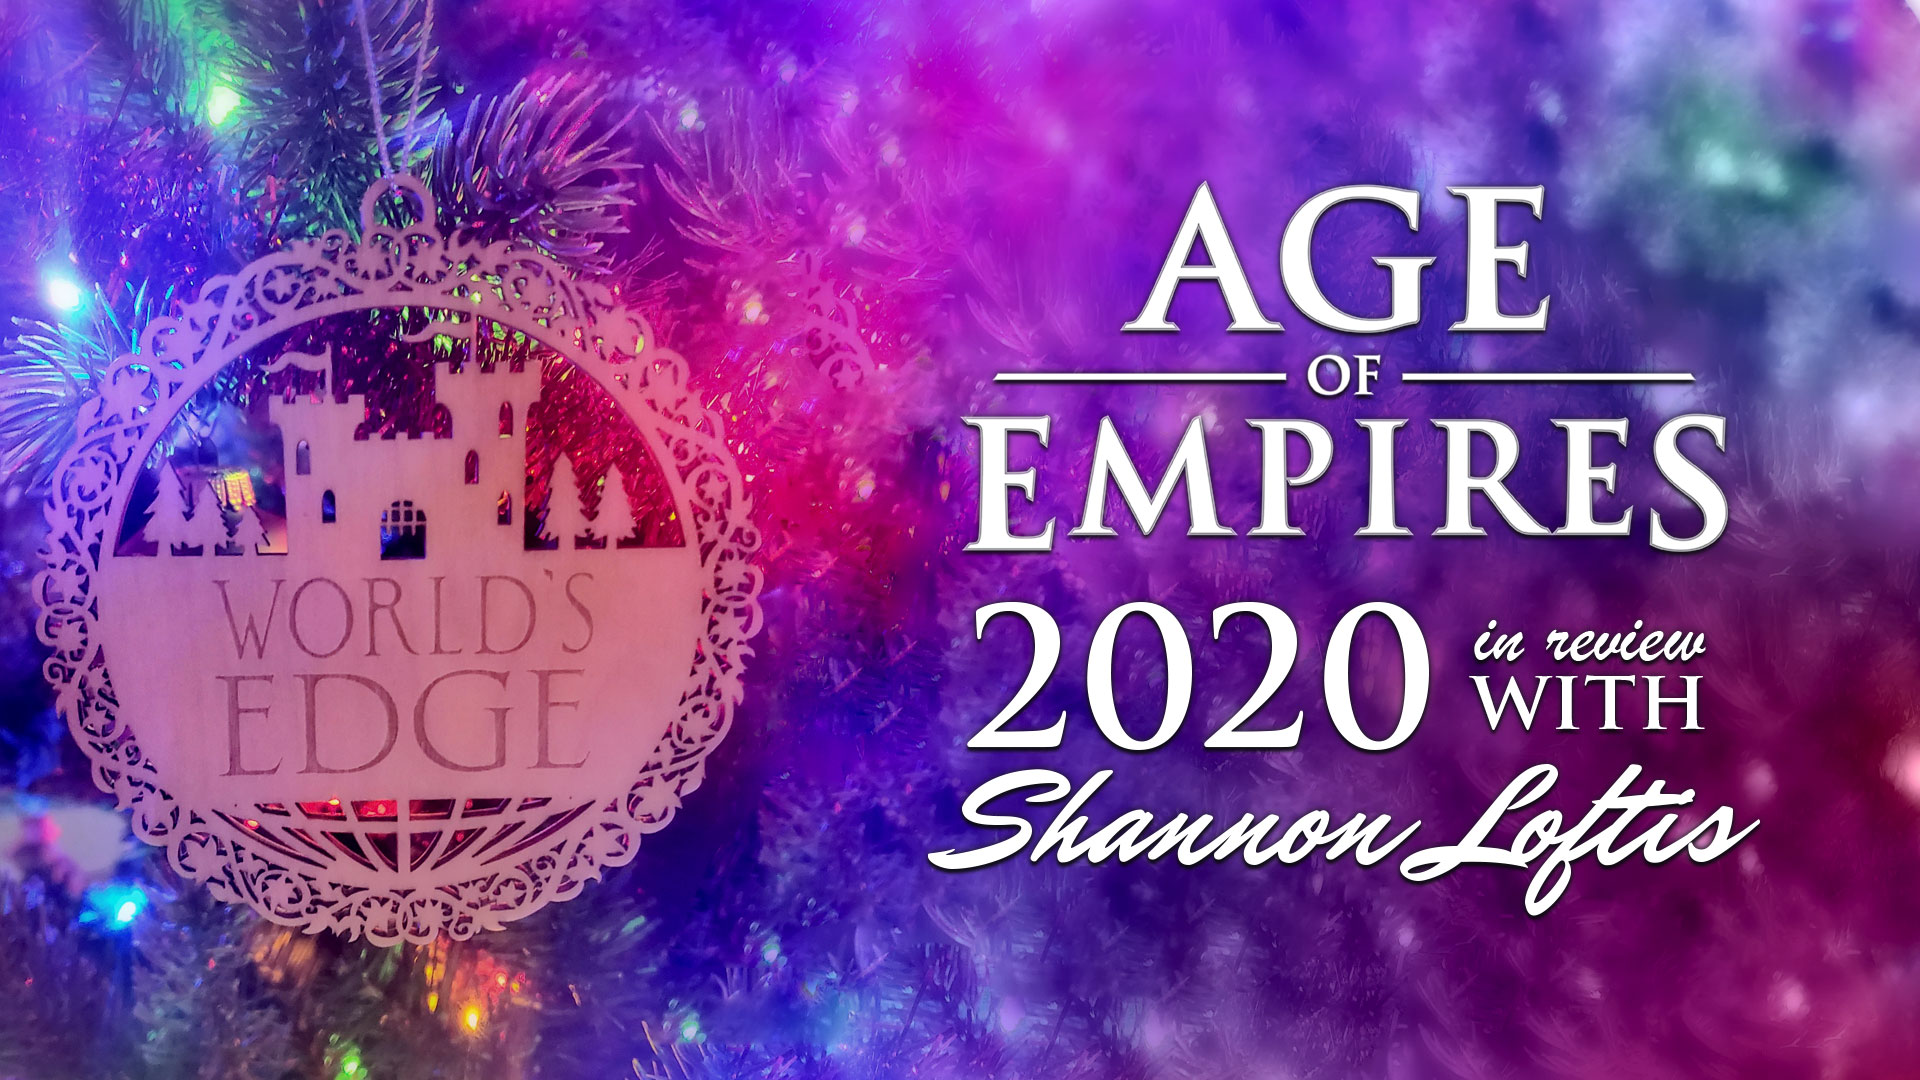 Age of Empires 2020 in Review: with Shannon Loftis - Age ...